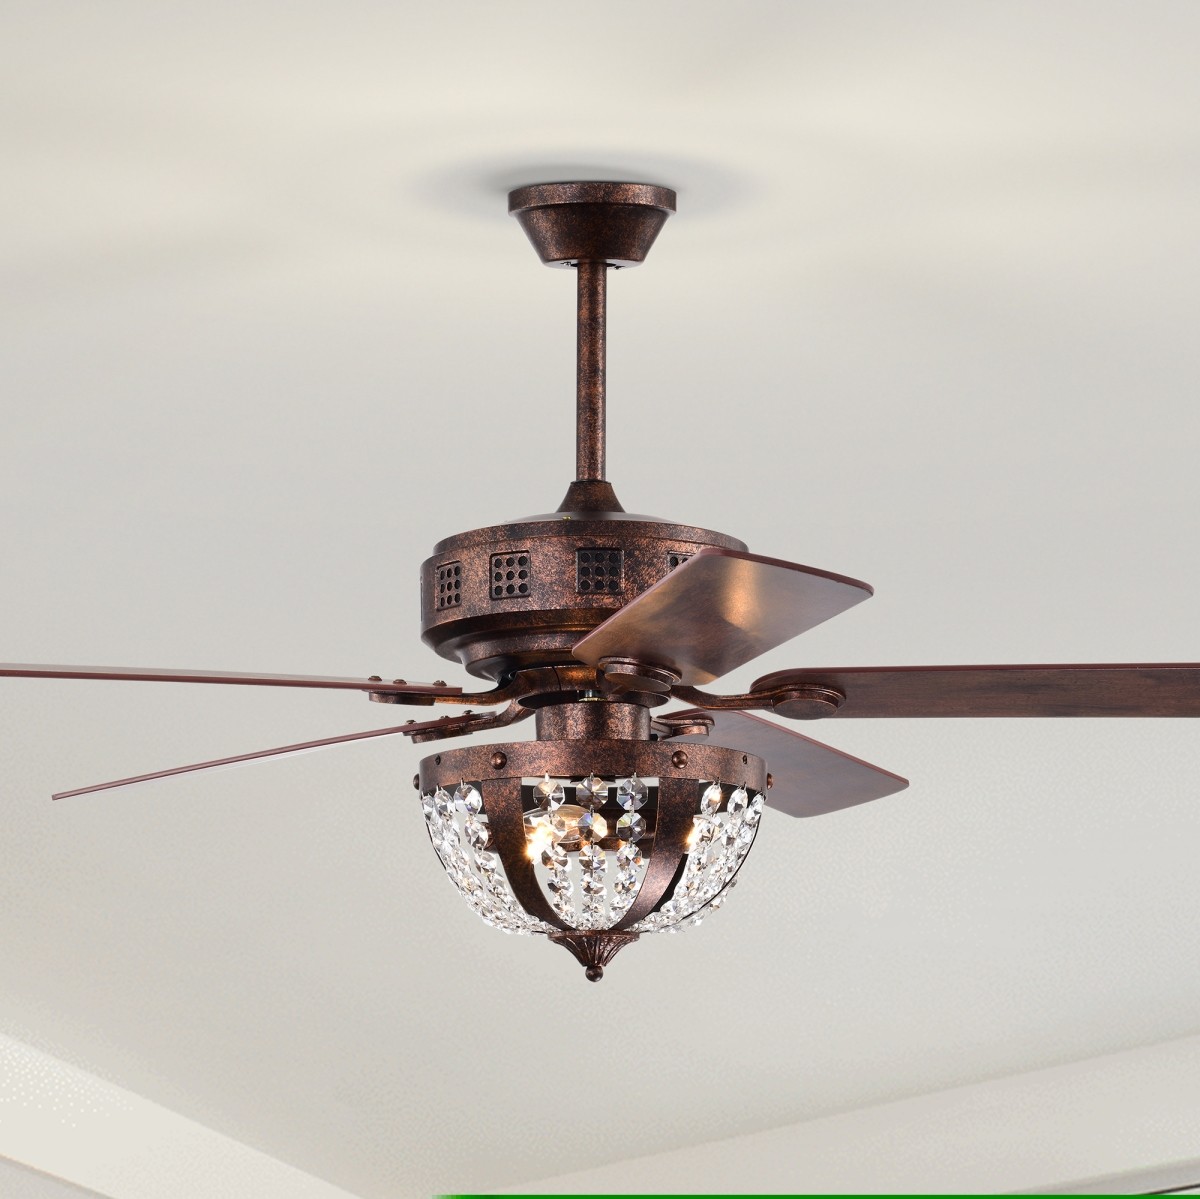 Chandler 52 in. 3-Light Indoor Antique Copper Finish Ceiling Fan with Light Kit and Remote